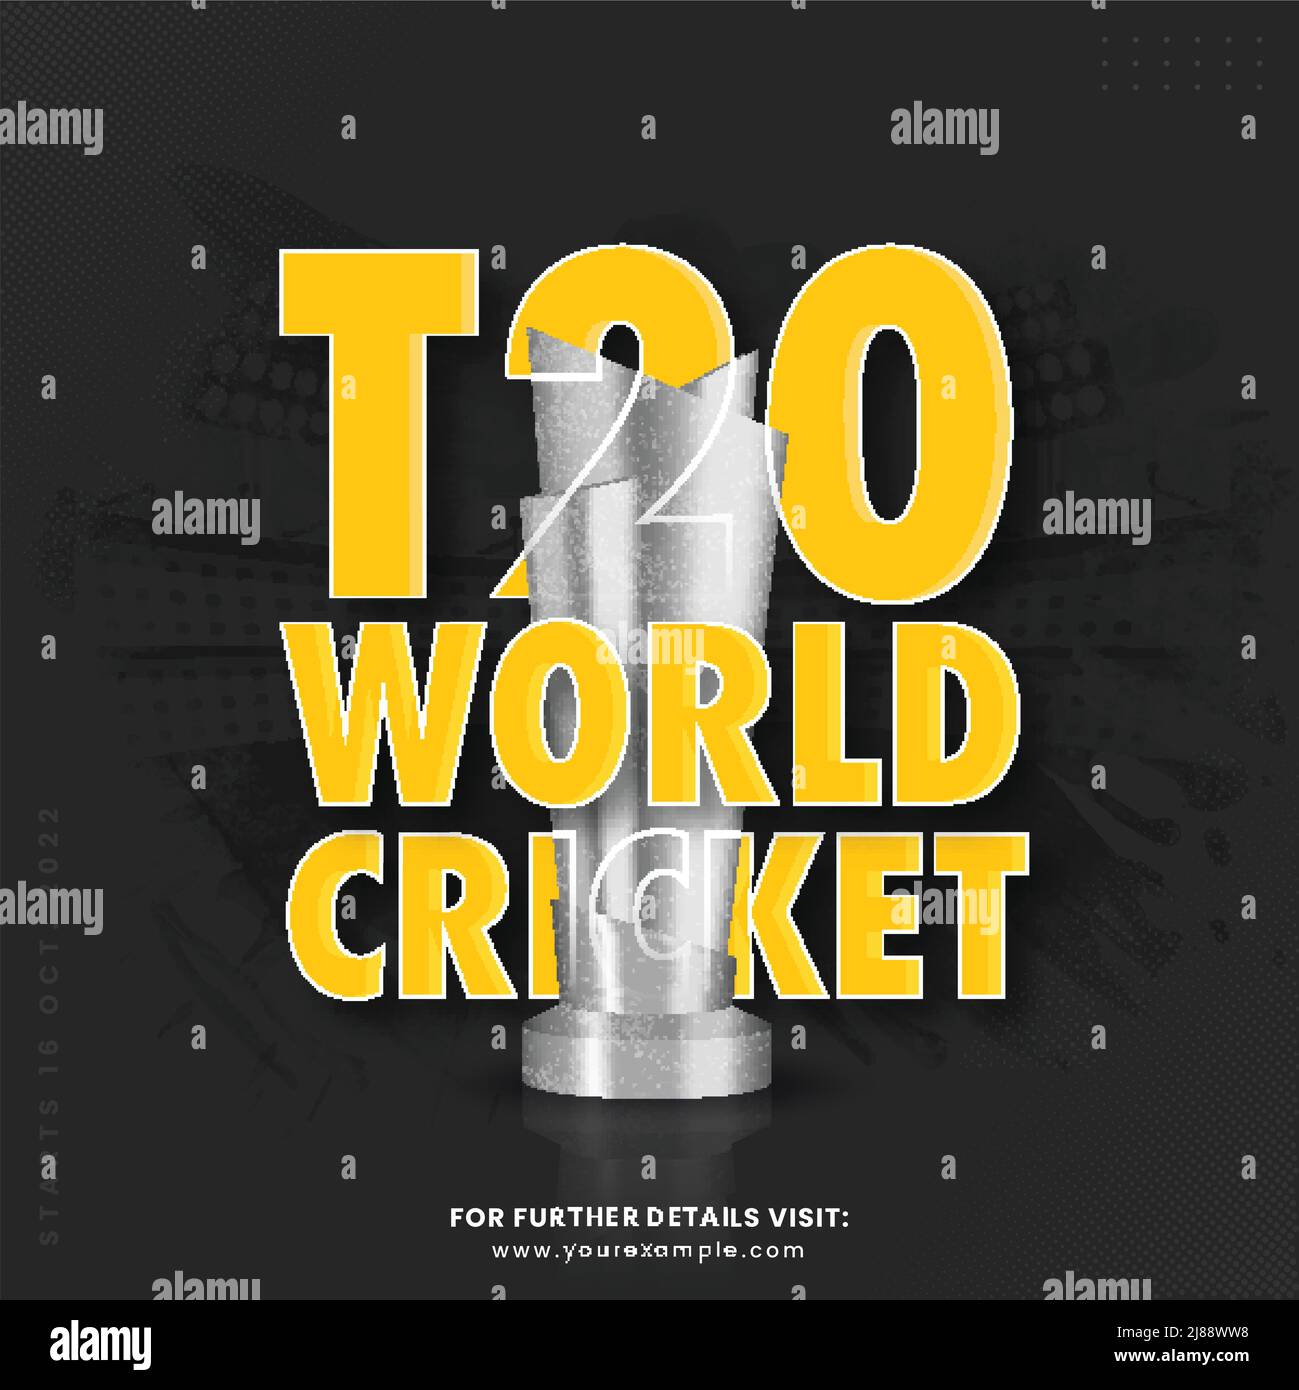 Yellow T20 World Cricket Font With 3D Silver Trophy Cup On Black Brush Effect Stadium Background. Stock Vector